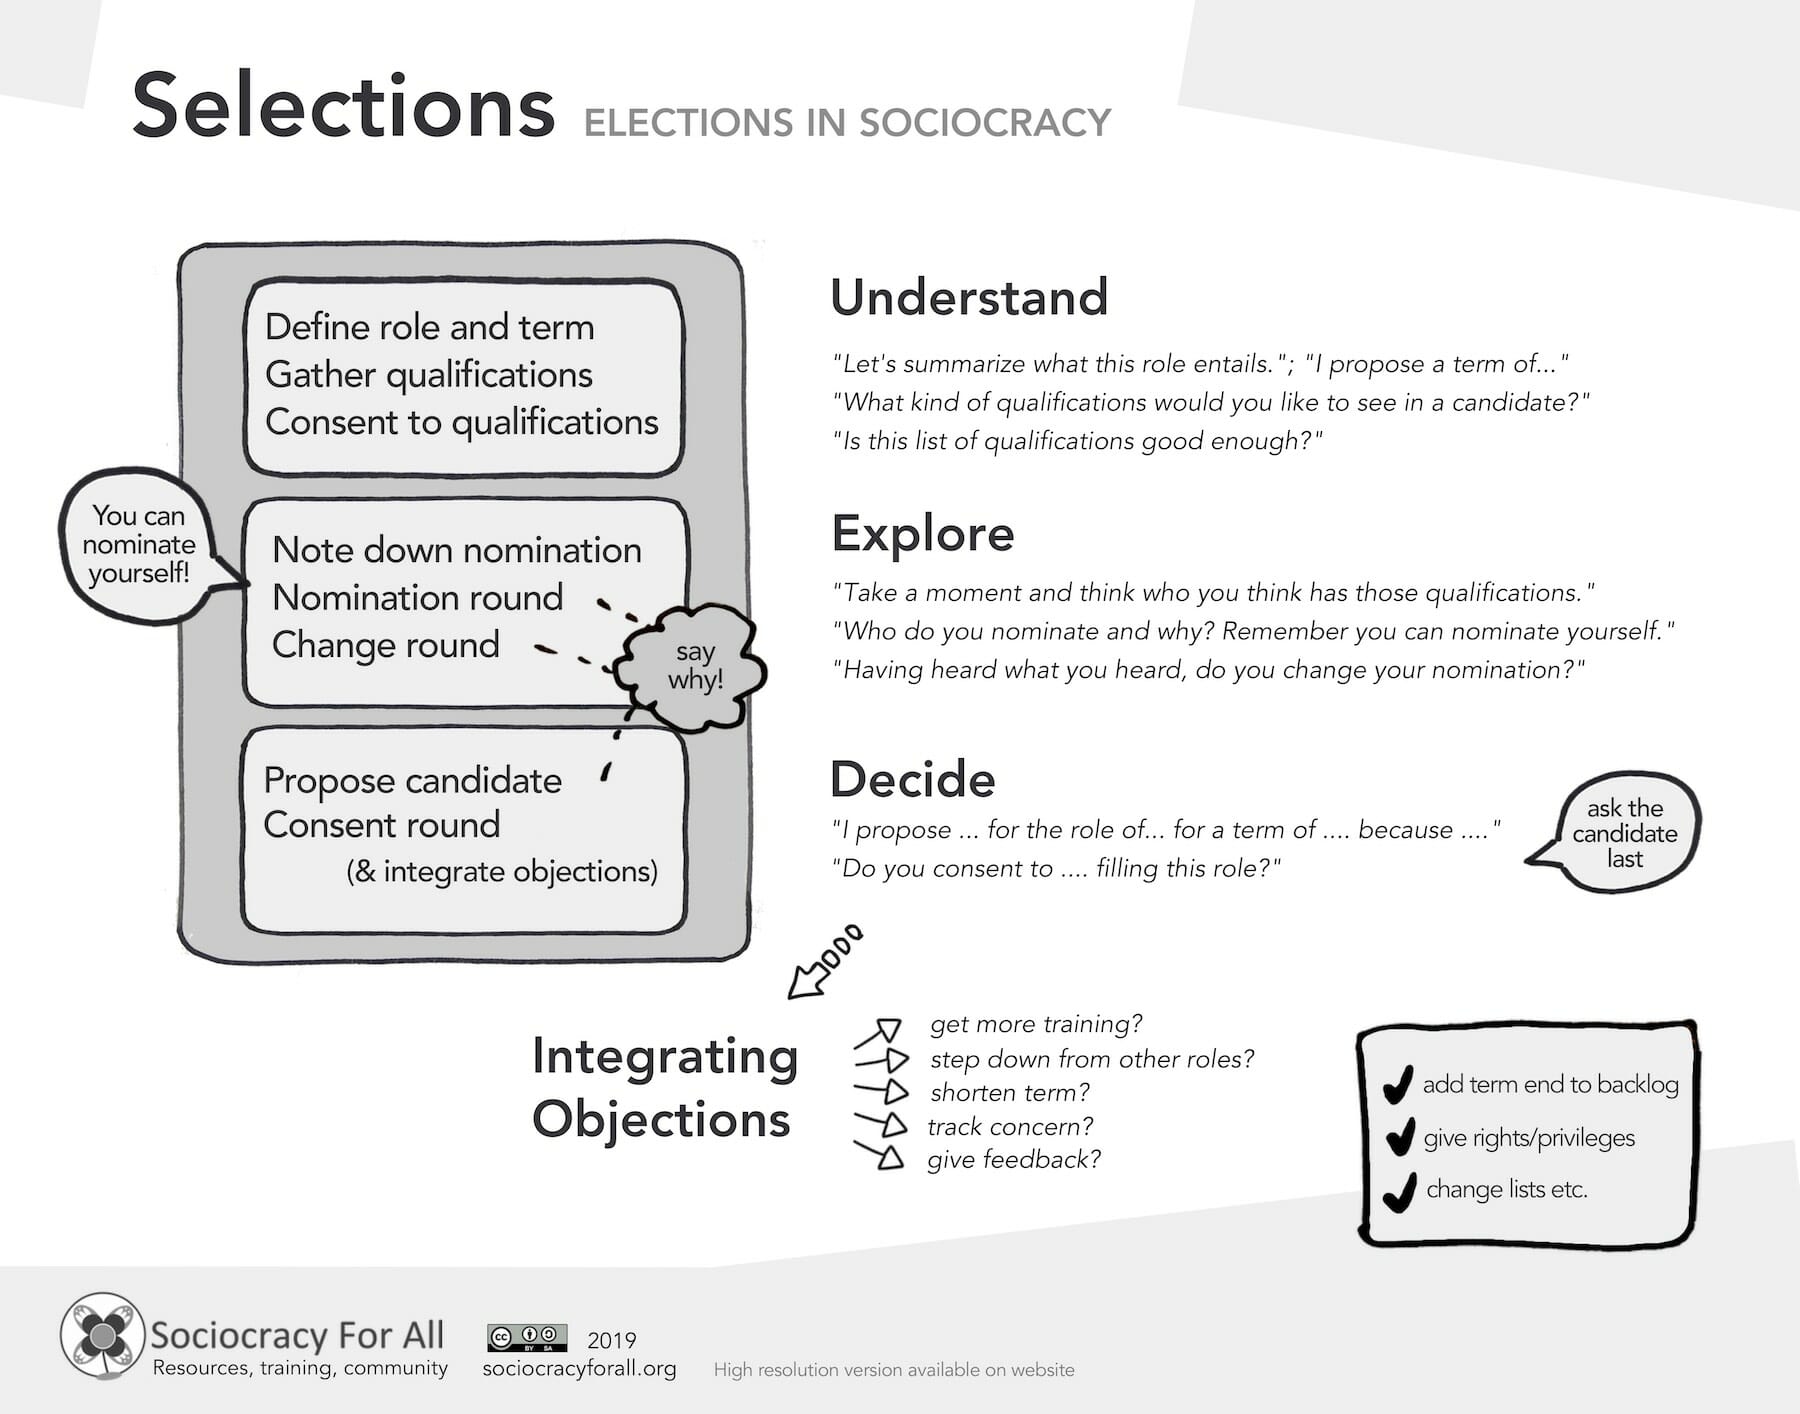 Meeting poster selection process low res - sociocracy resources - Sociocracy For All